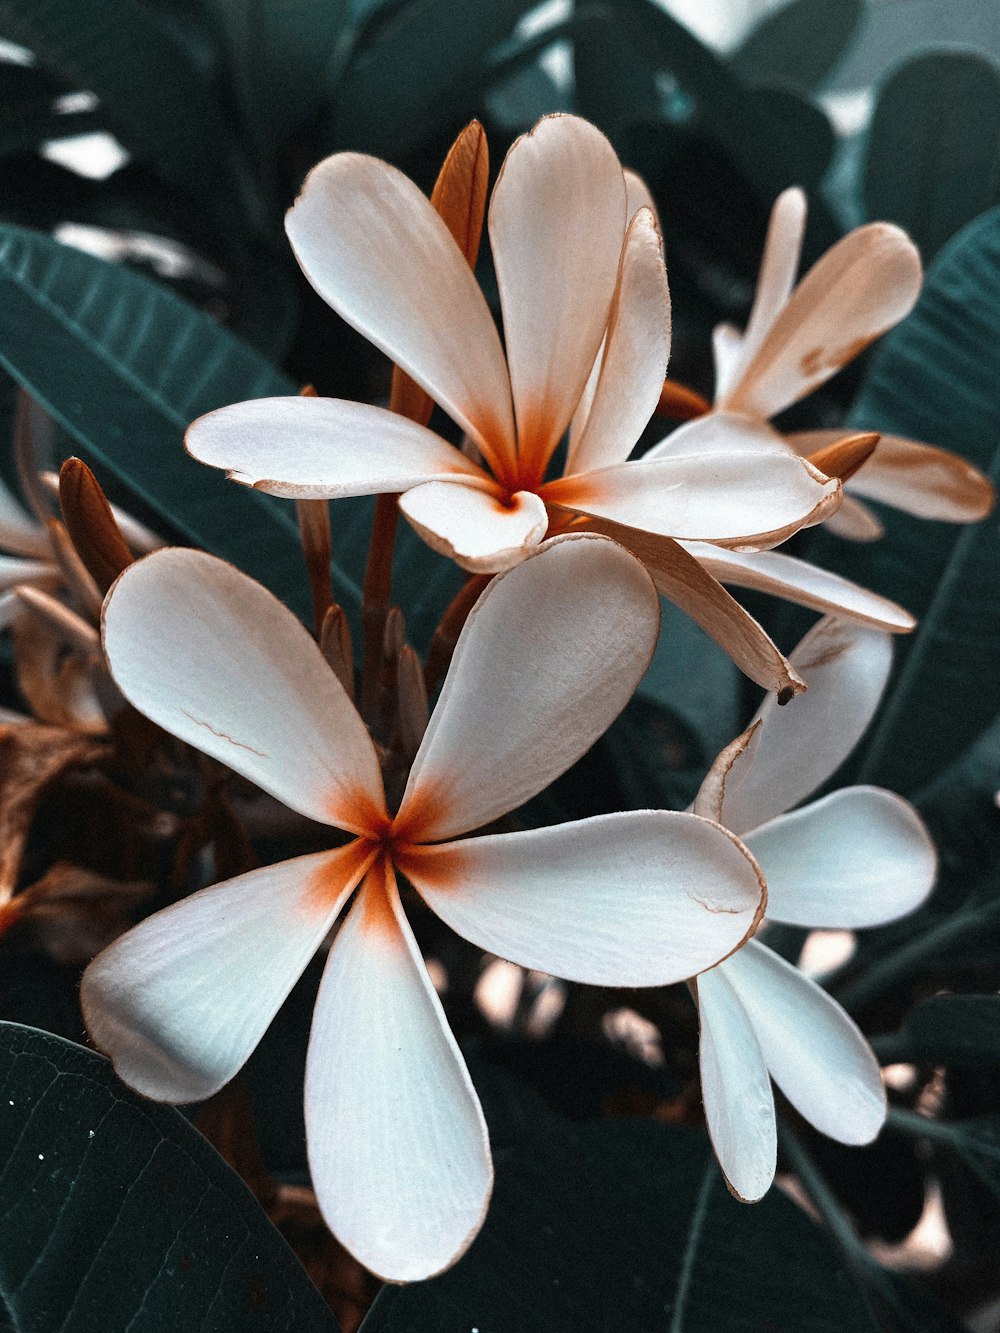 30k+ Red And White Flower Pictures | Download Free Images on Unsplash